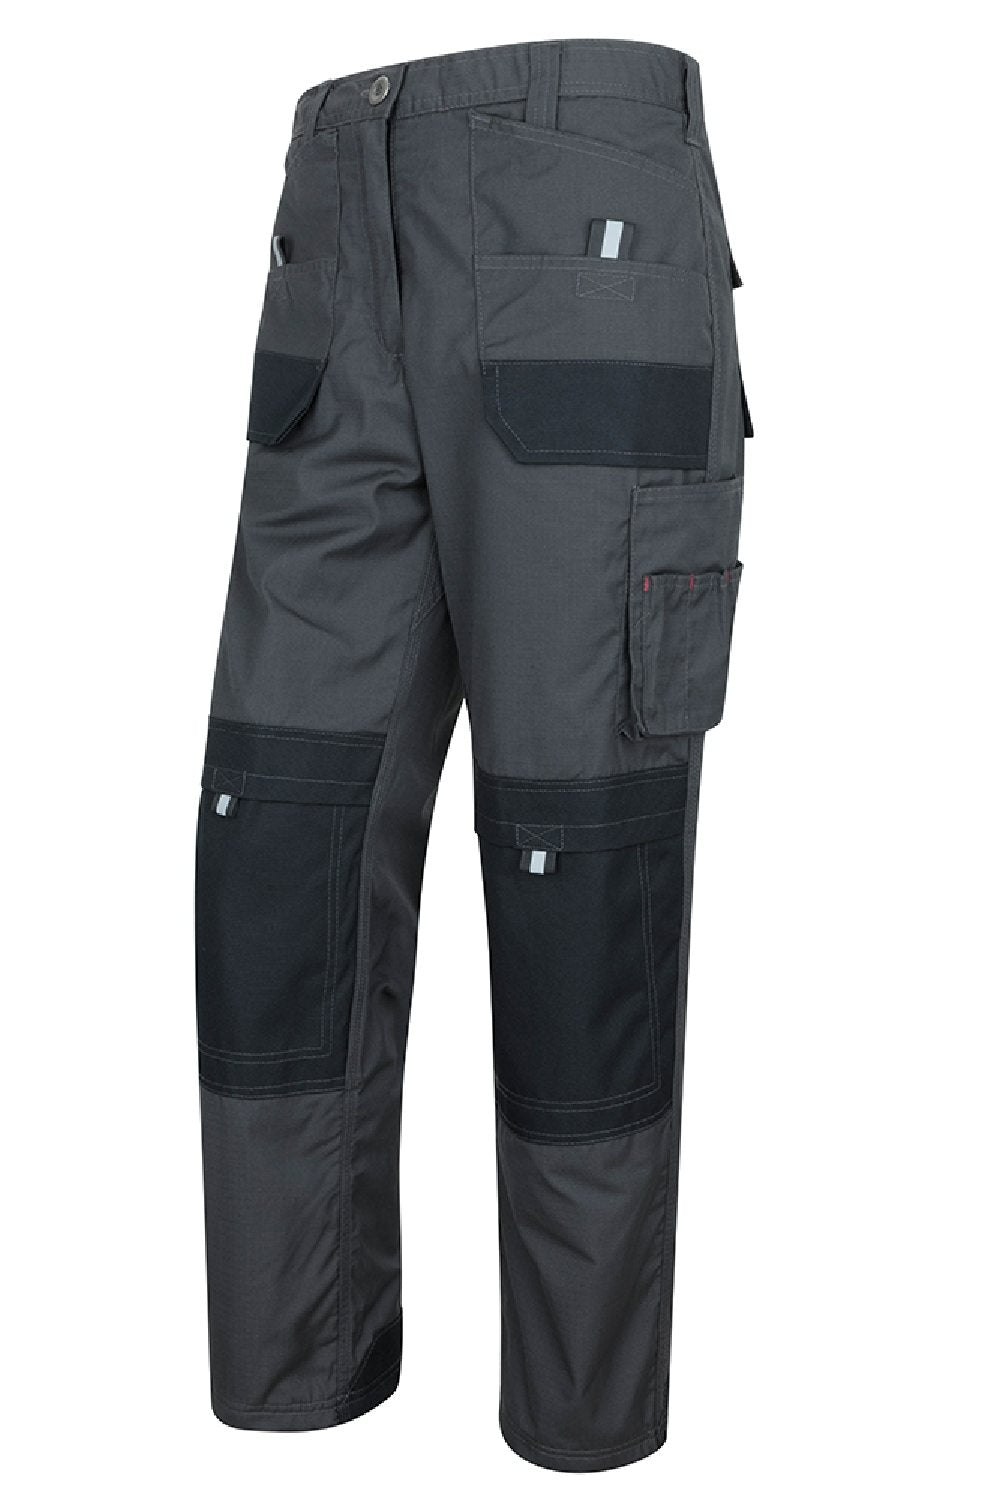 Hoggs of Fife Granite II Utility Unlined Trousers in Charcoal/Black